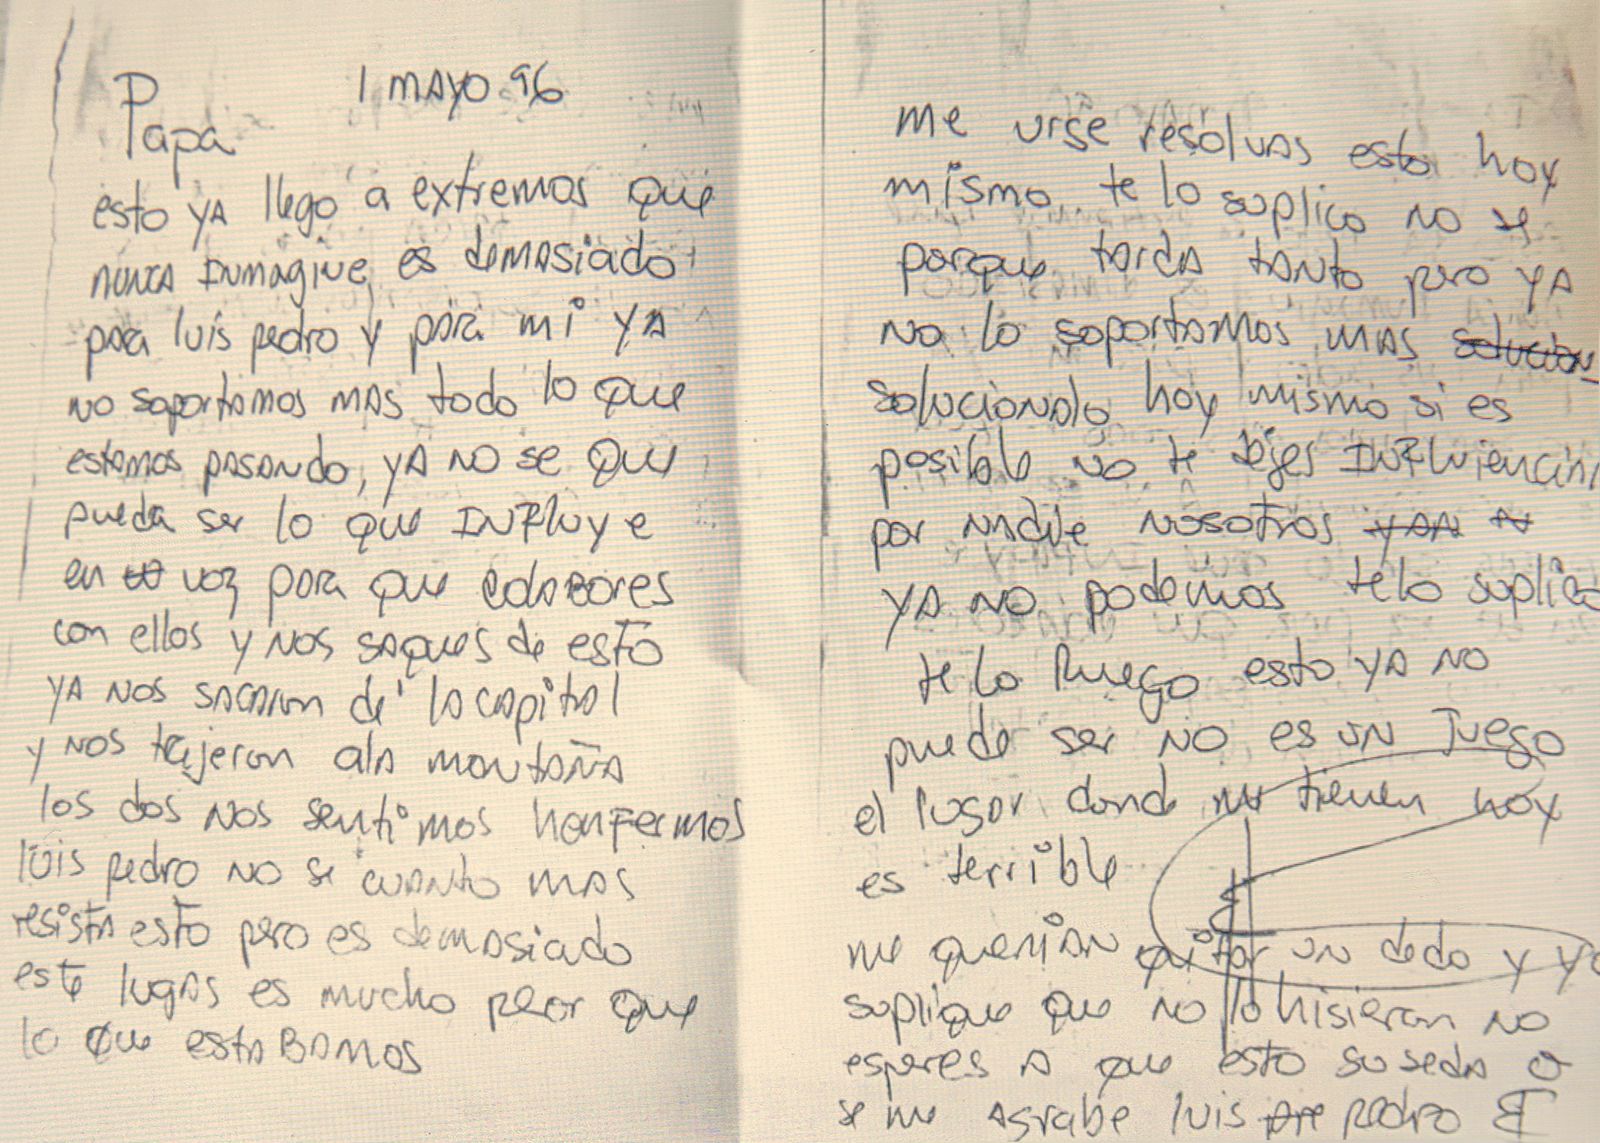 Proof of life 03. Letter from Juan Corzo, Jr. to Juan Corzo, Sr.Translation:‘1st of May, 96